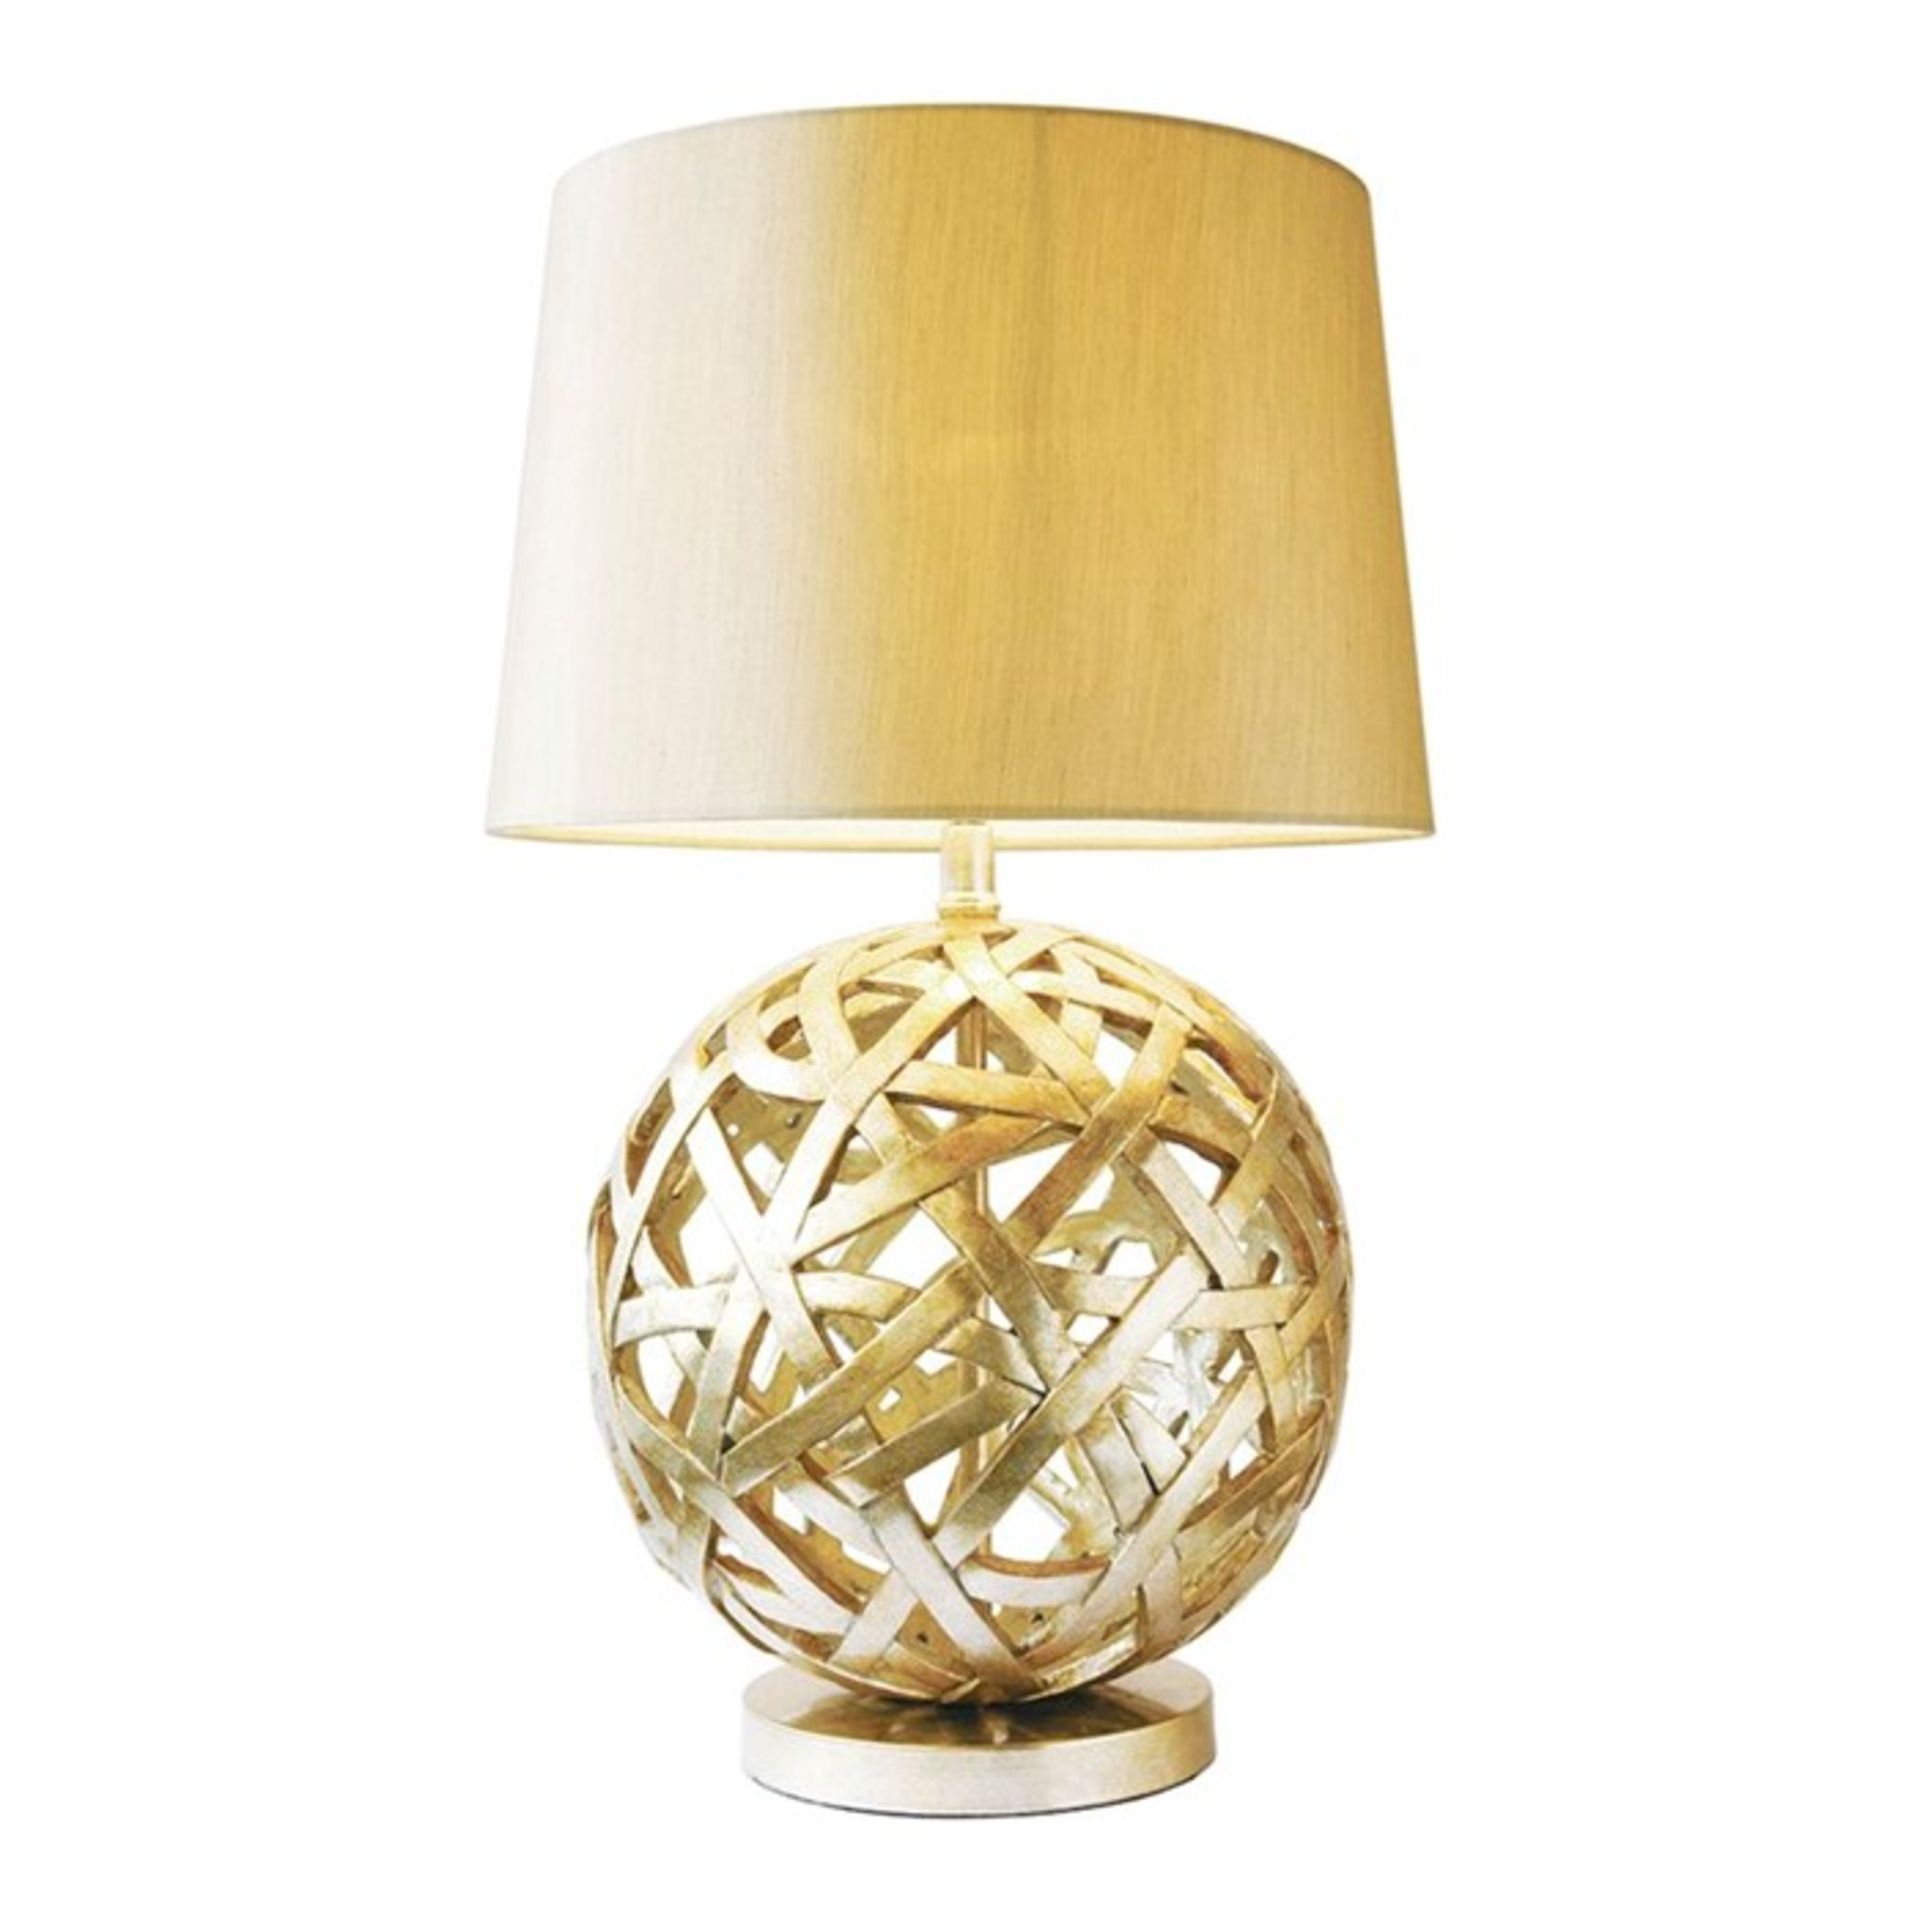 Canora Grey, Lundys 62cm Table Lamp RRP £94.99 (DLI4002 - 16648/10) 4C